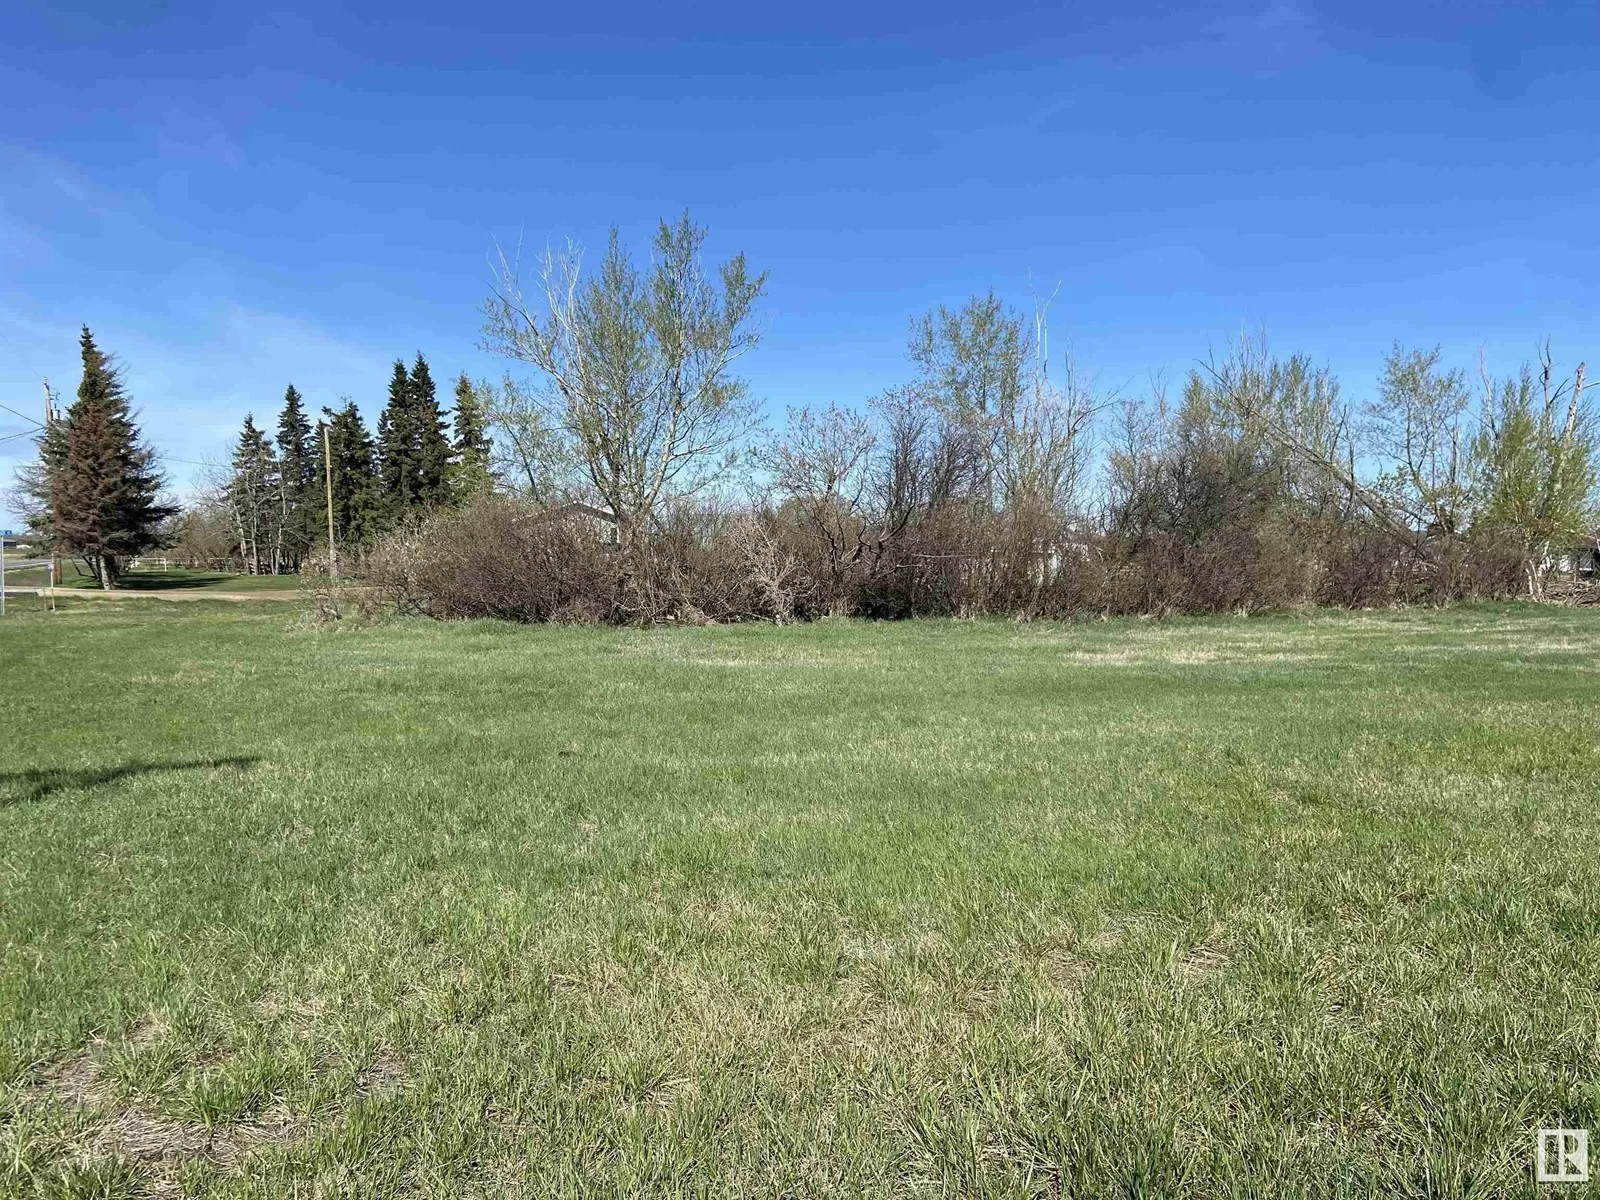 No Building for rent: #233 26500 Hwy 44, Riviere Qui Barre, Alberta T8R 0J3